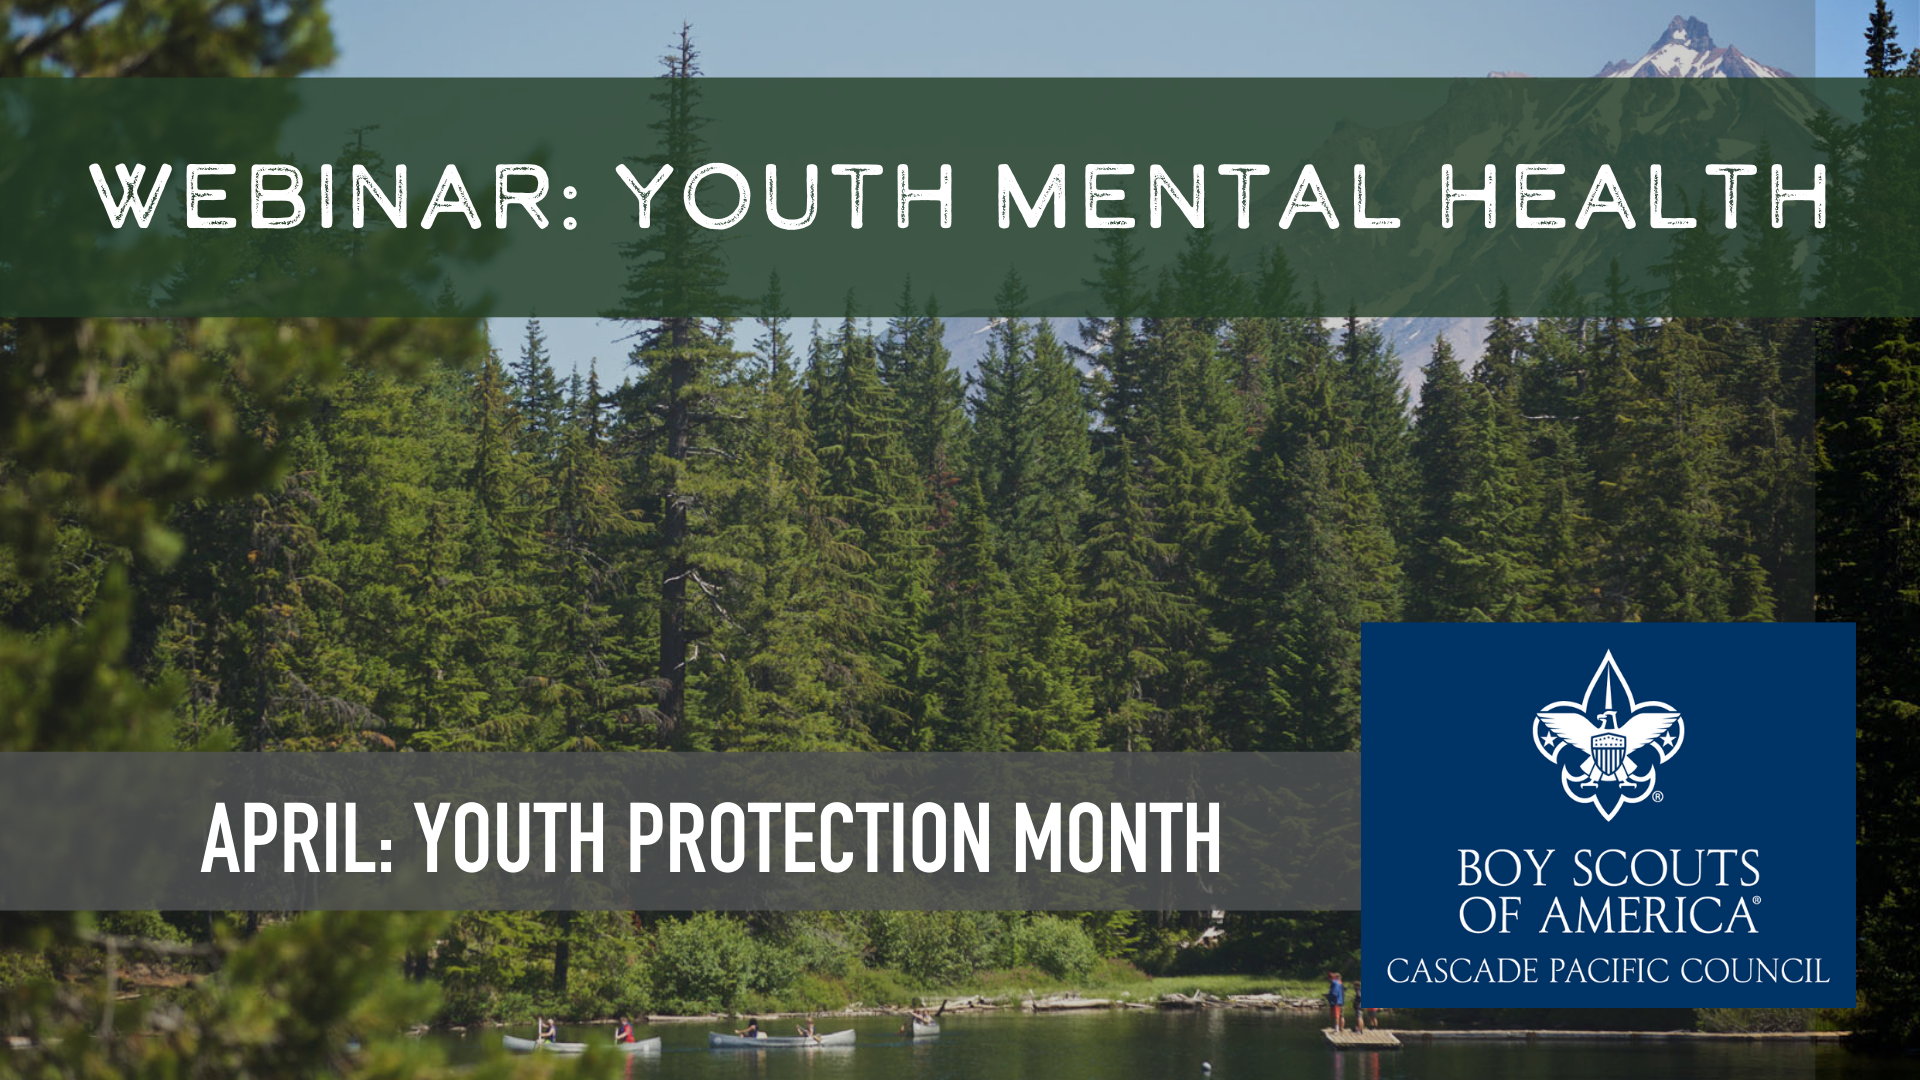 Webinar: Youth Protection Month: Youth Mental Health